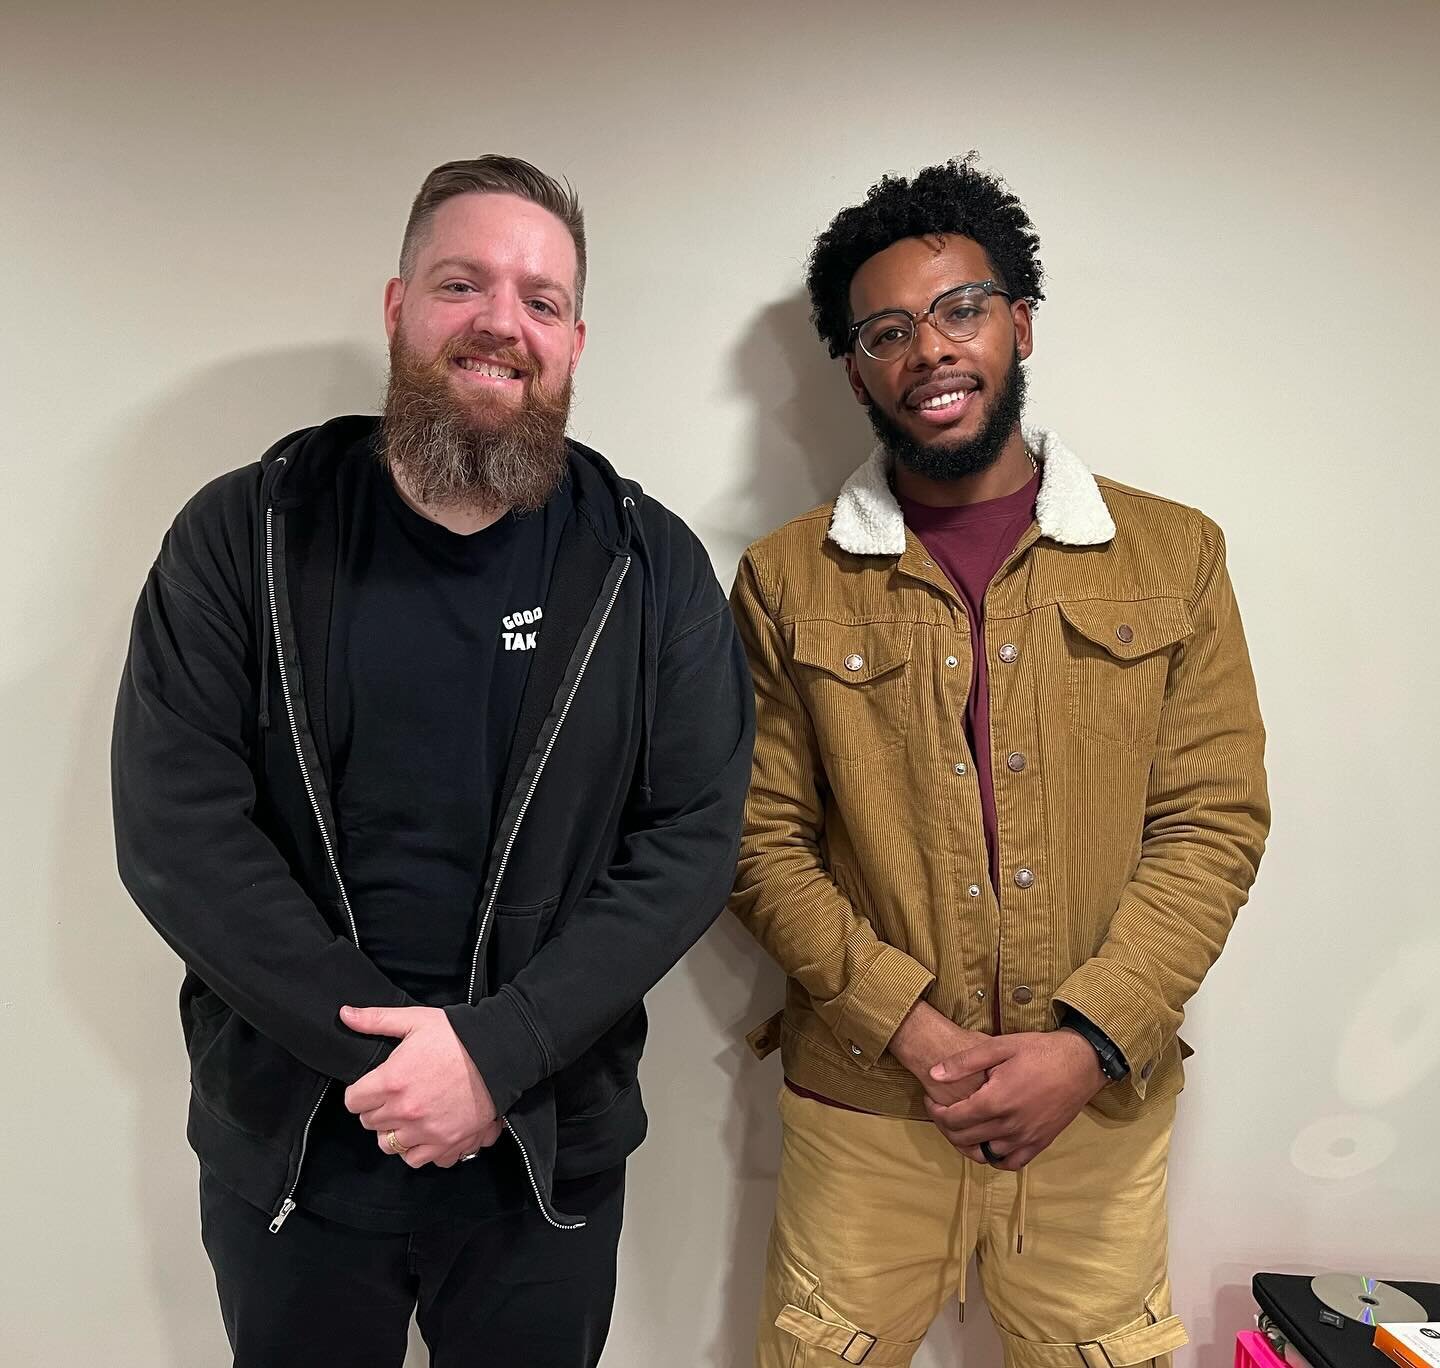 This week, I sit down with the very talented @koreytheartist to speak about his journey into becoming the artist he is today. He stops by the studio and we talk about everything from growing up and being unfocused to how he made his choice to hone hi